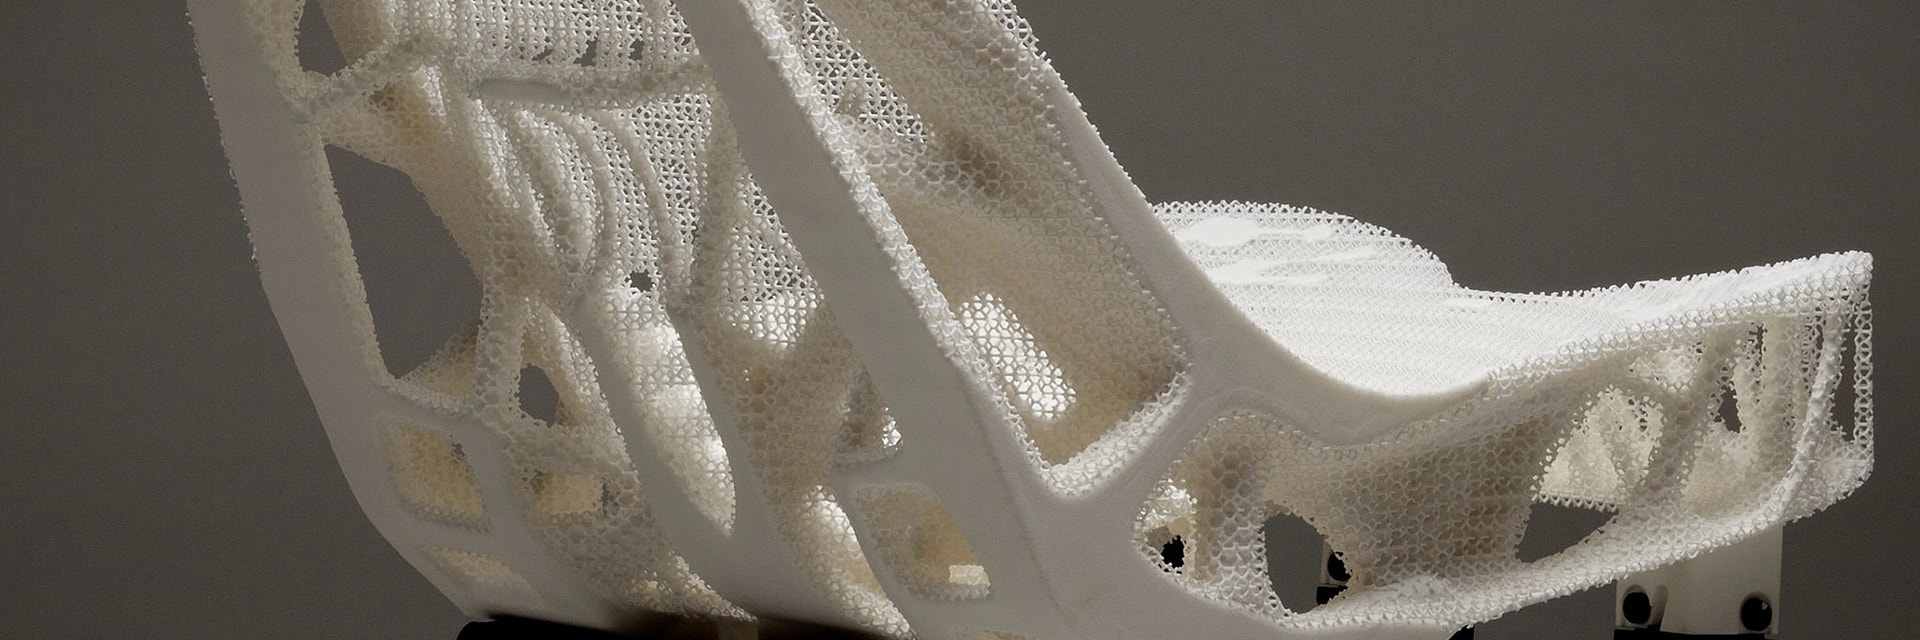 Rear view of a 3D-printed car seat with lightweight structures